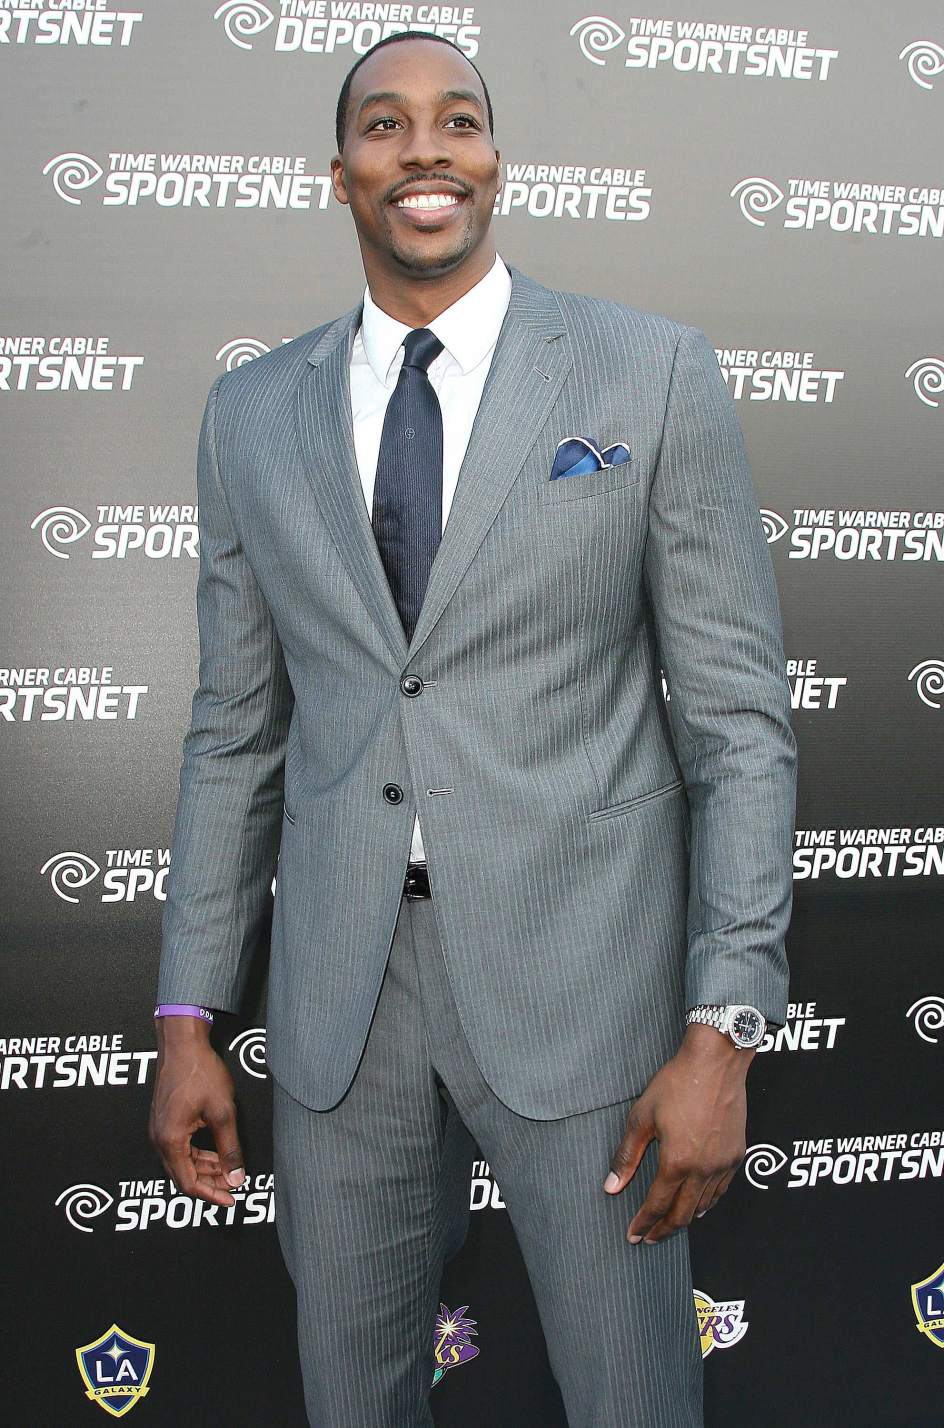 ¿Cuánto mide Dwight Howard? - Real height 496664-944-1428